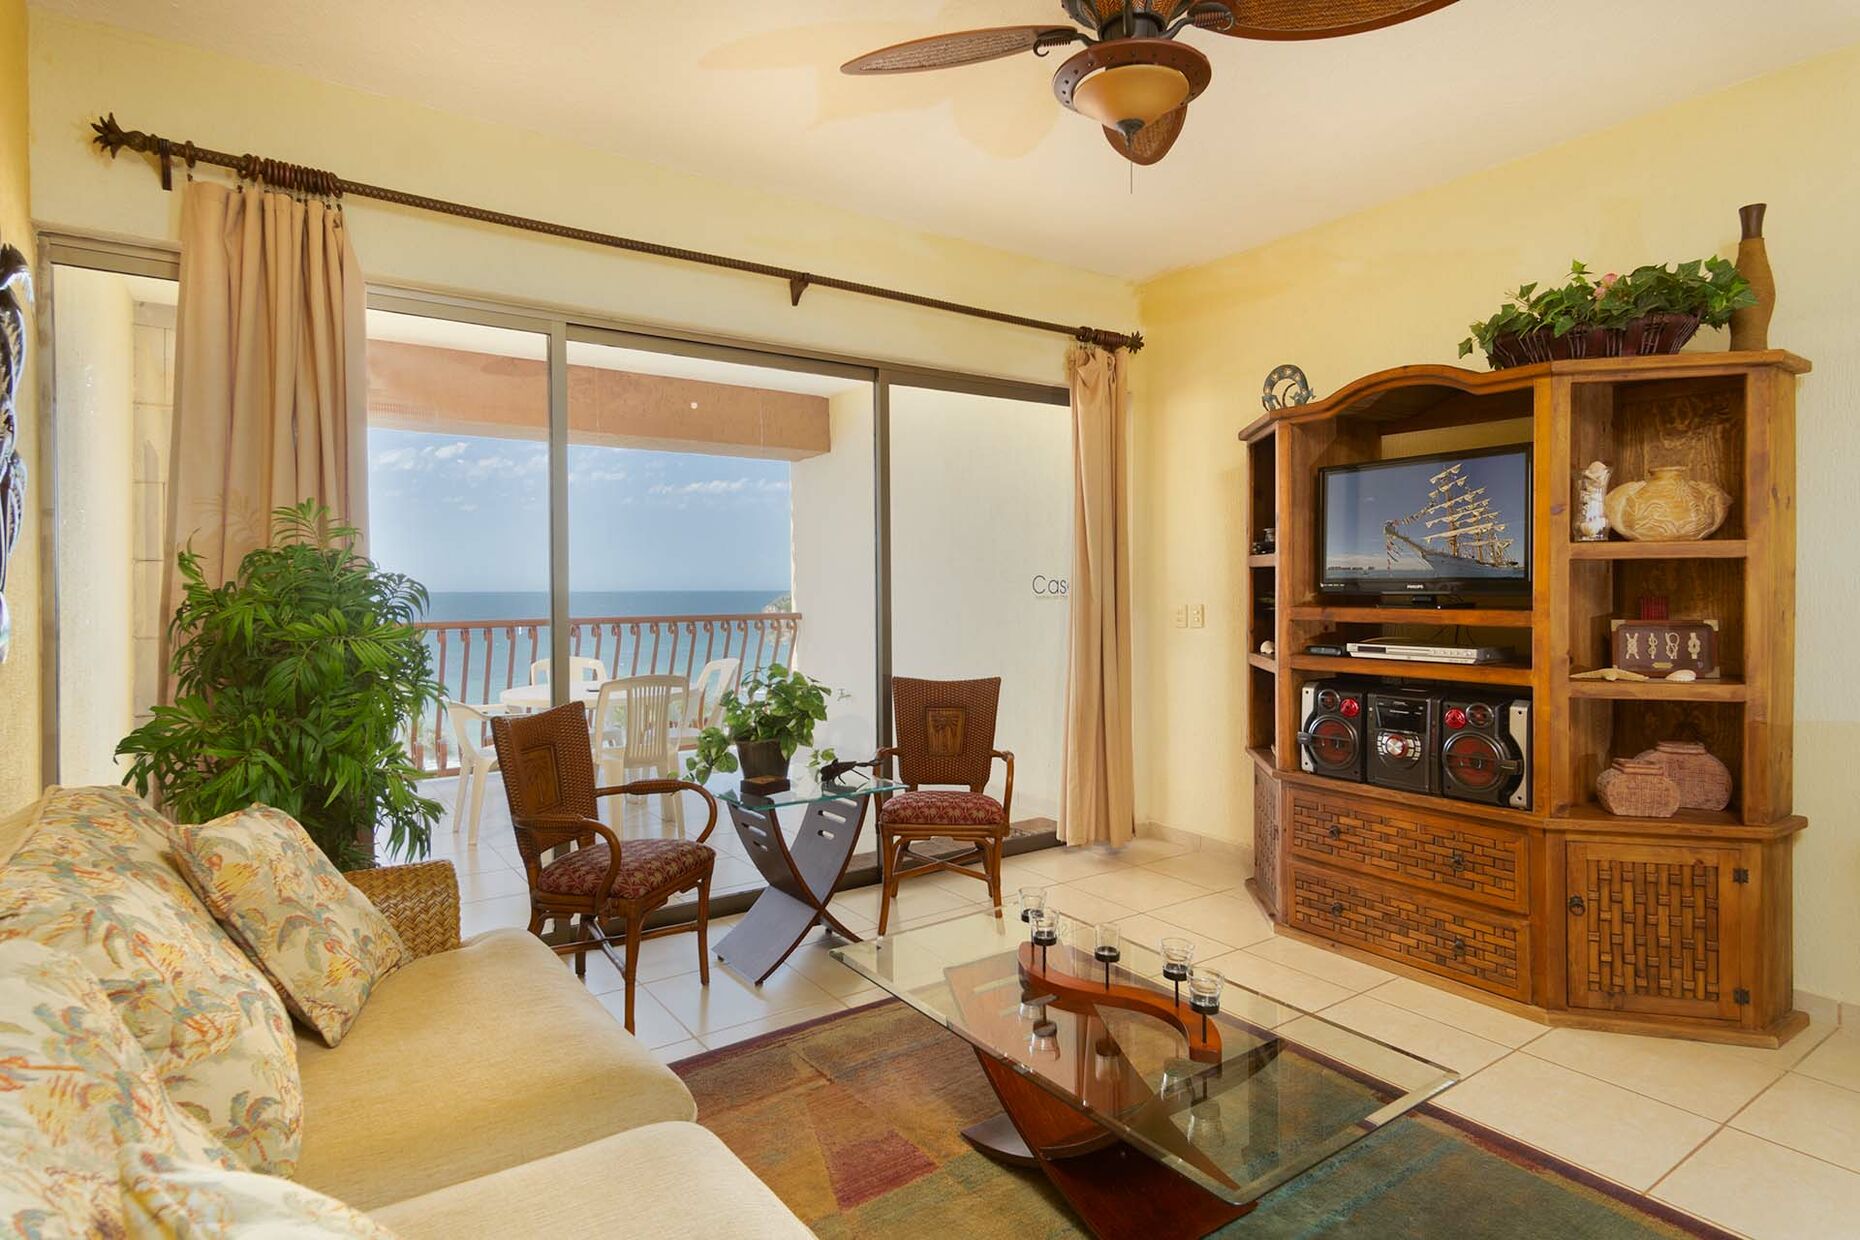 SW 411 has a warm, inviting living room with comfortable seating, and an entertainment center.